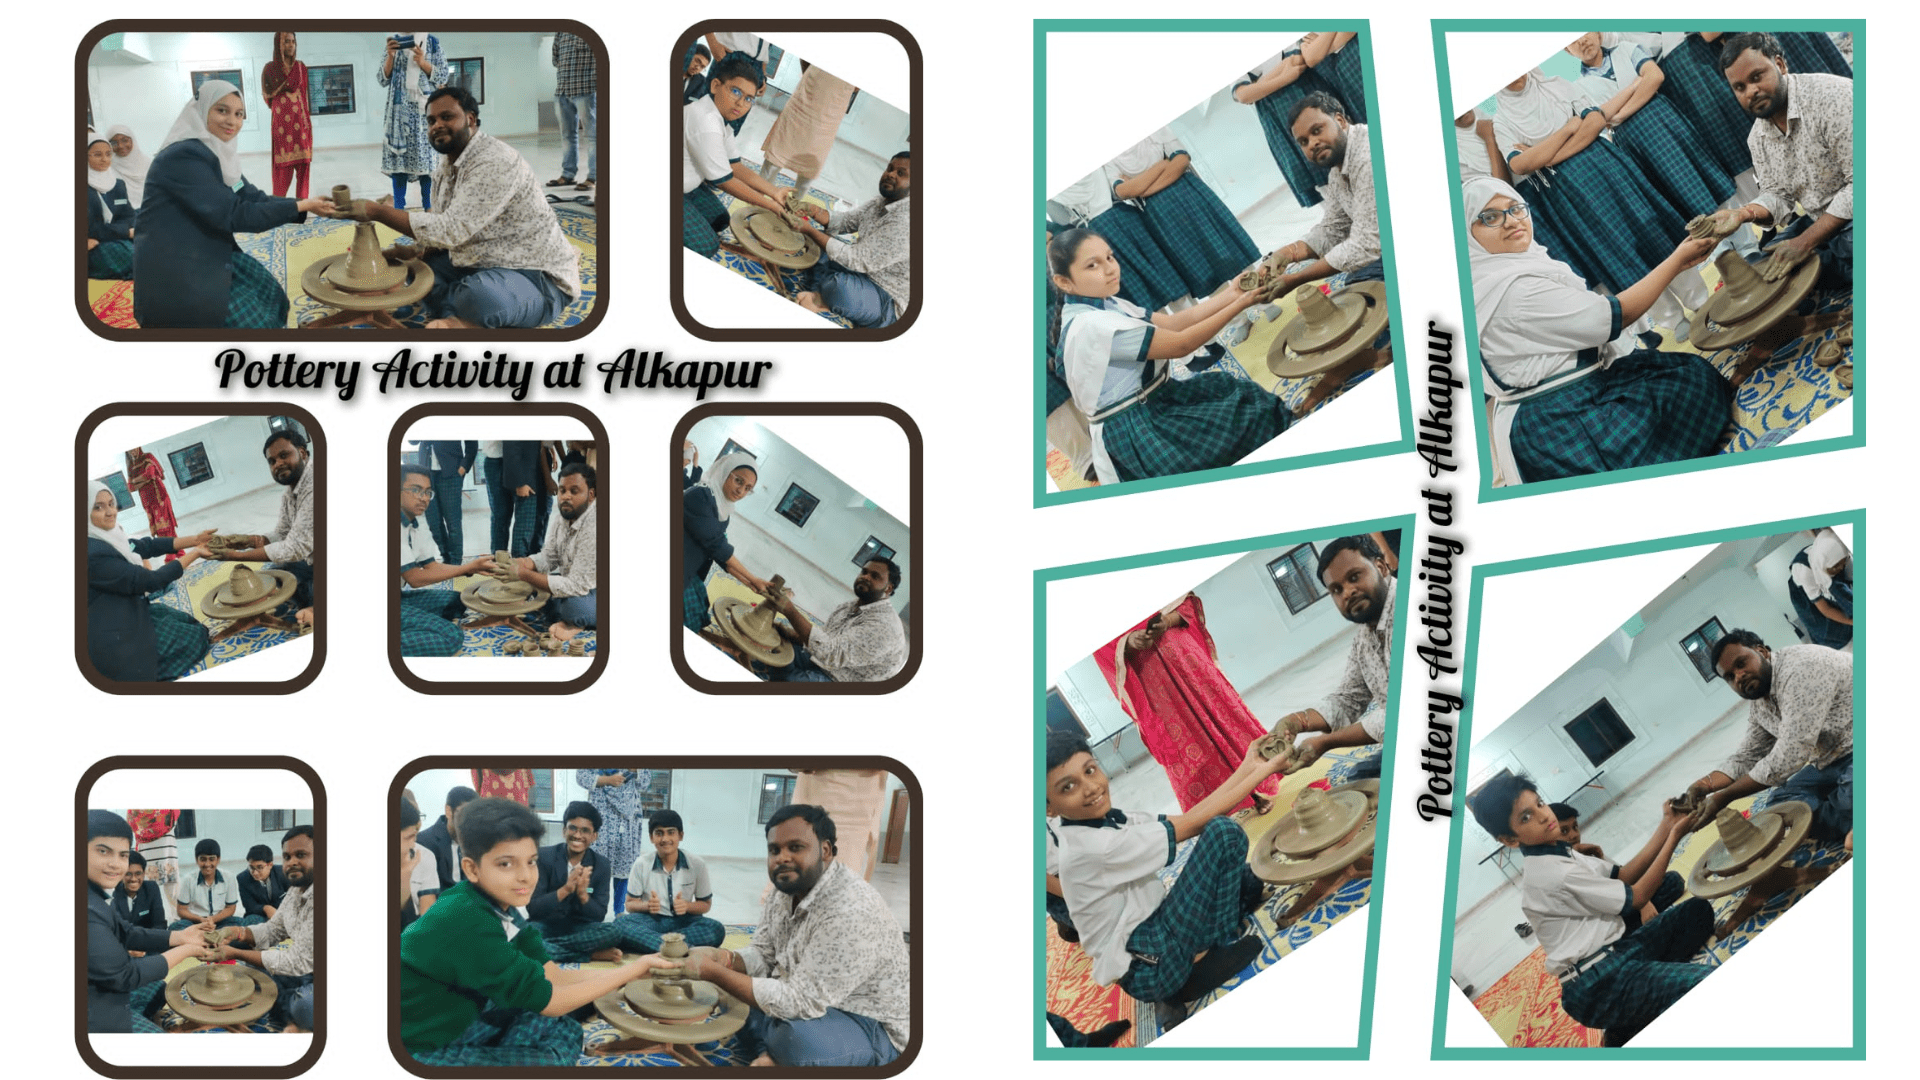 Glimpses of POTTERY ACTIVITY